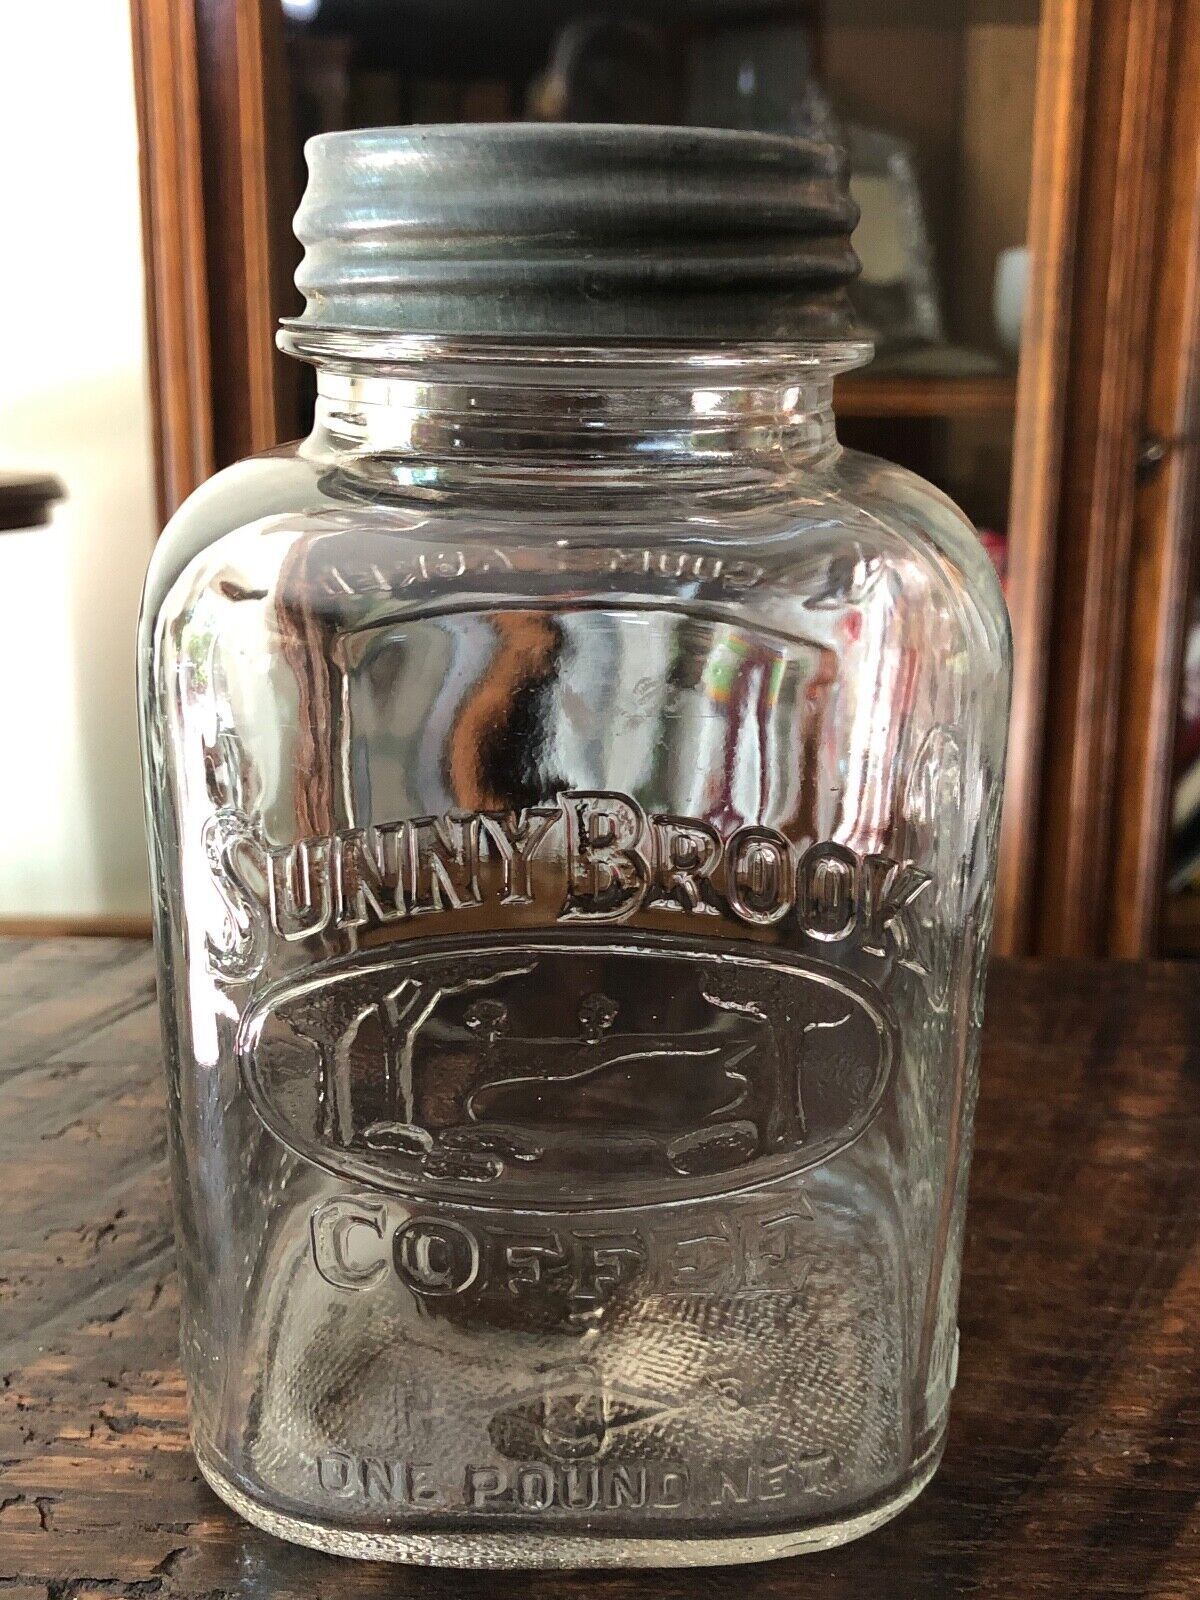 Vintage SUNNY BROOK COFFEE Jar Clear Glass - Excellent Condition